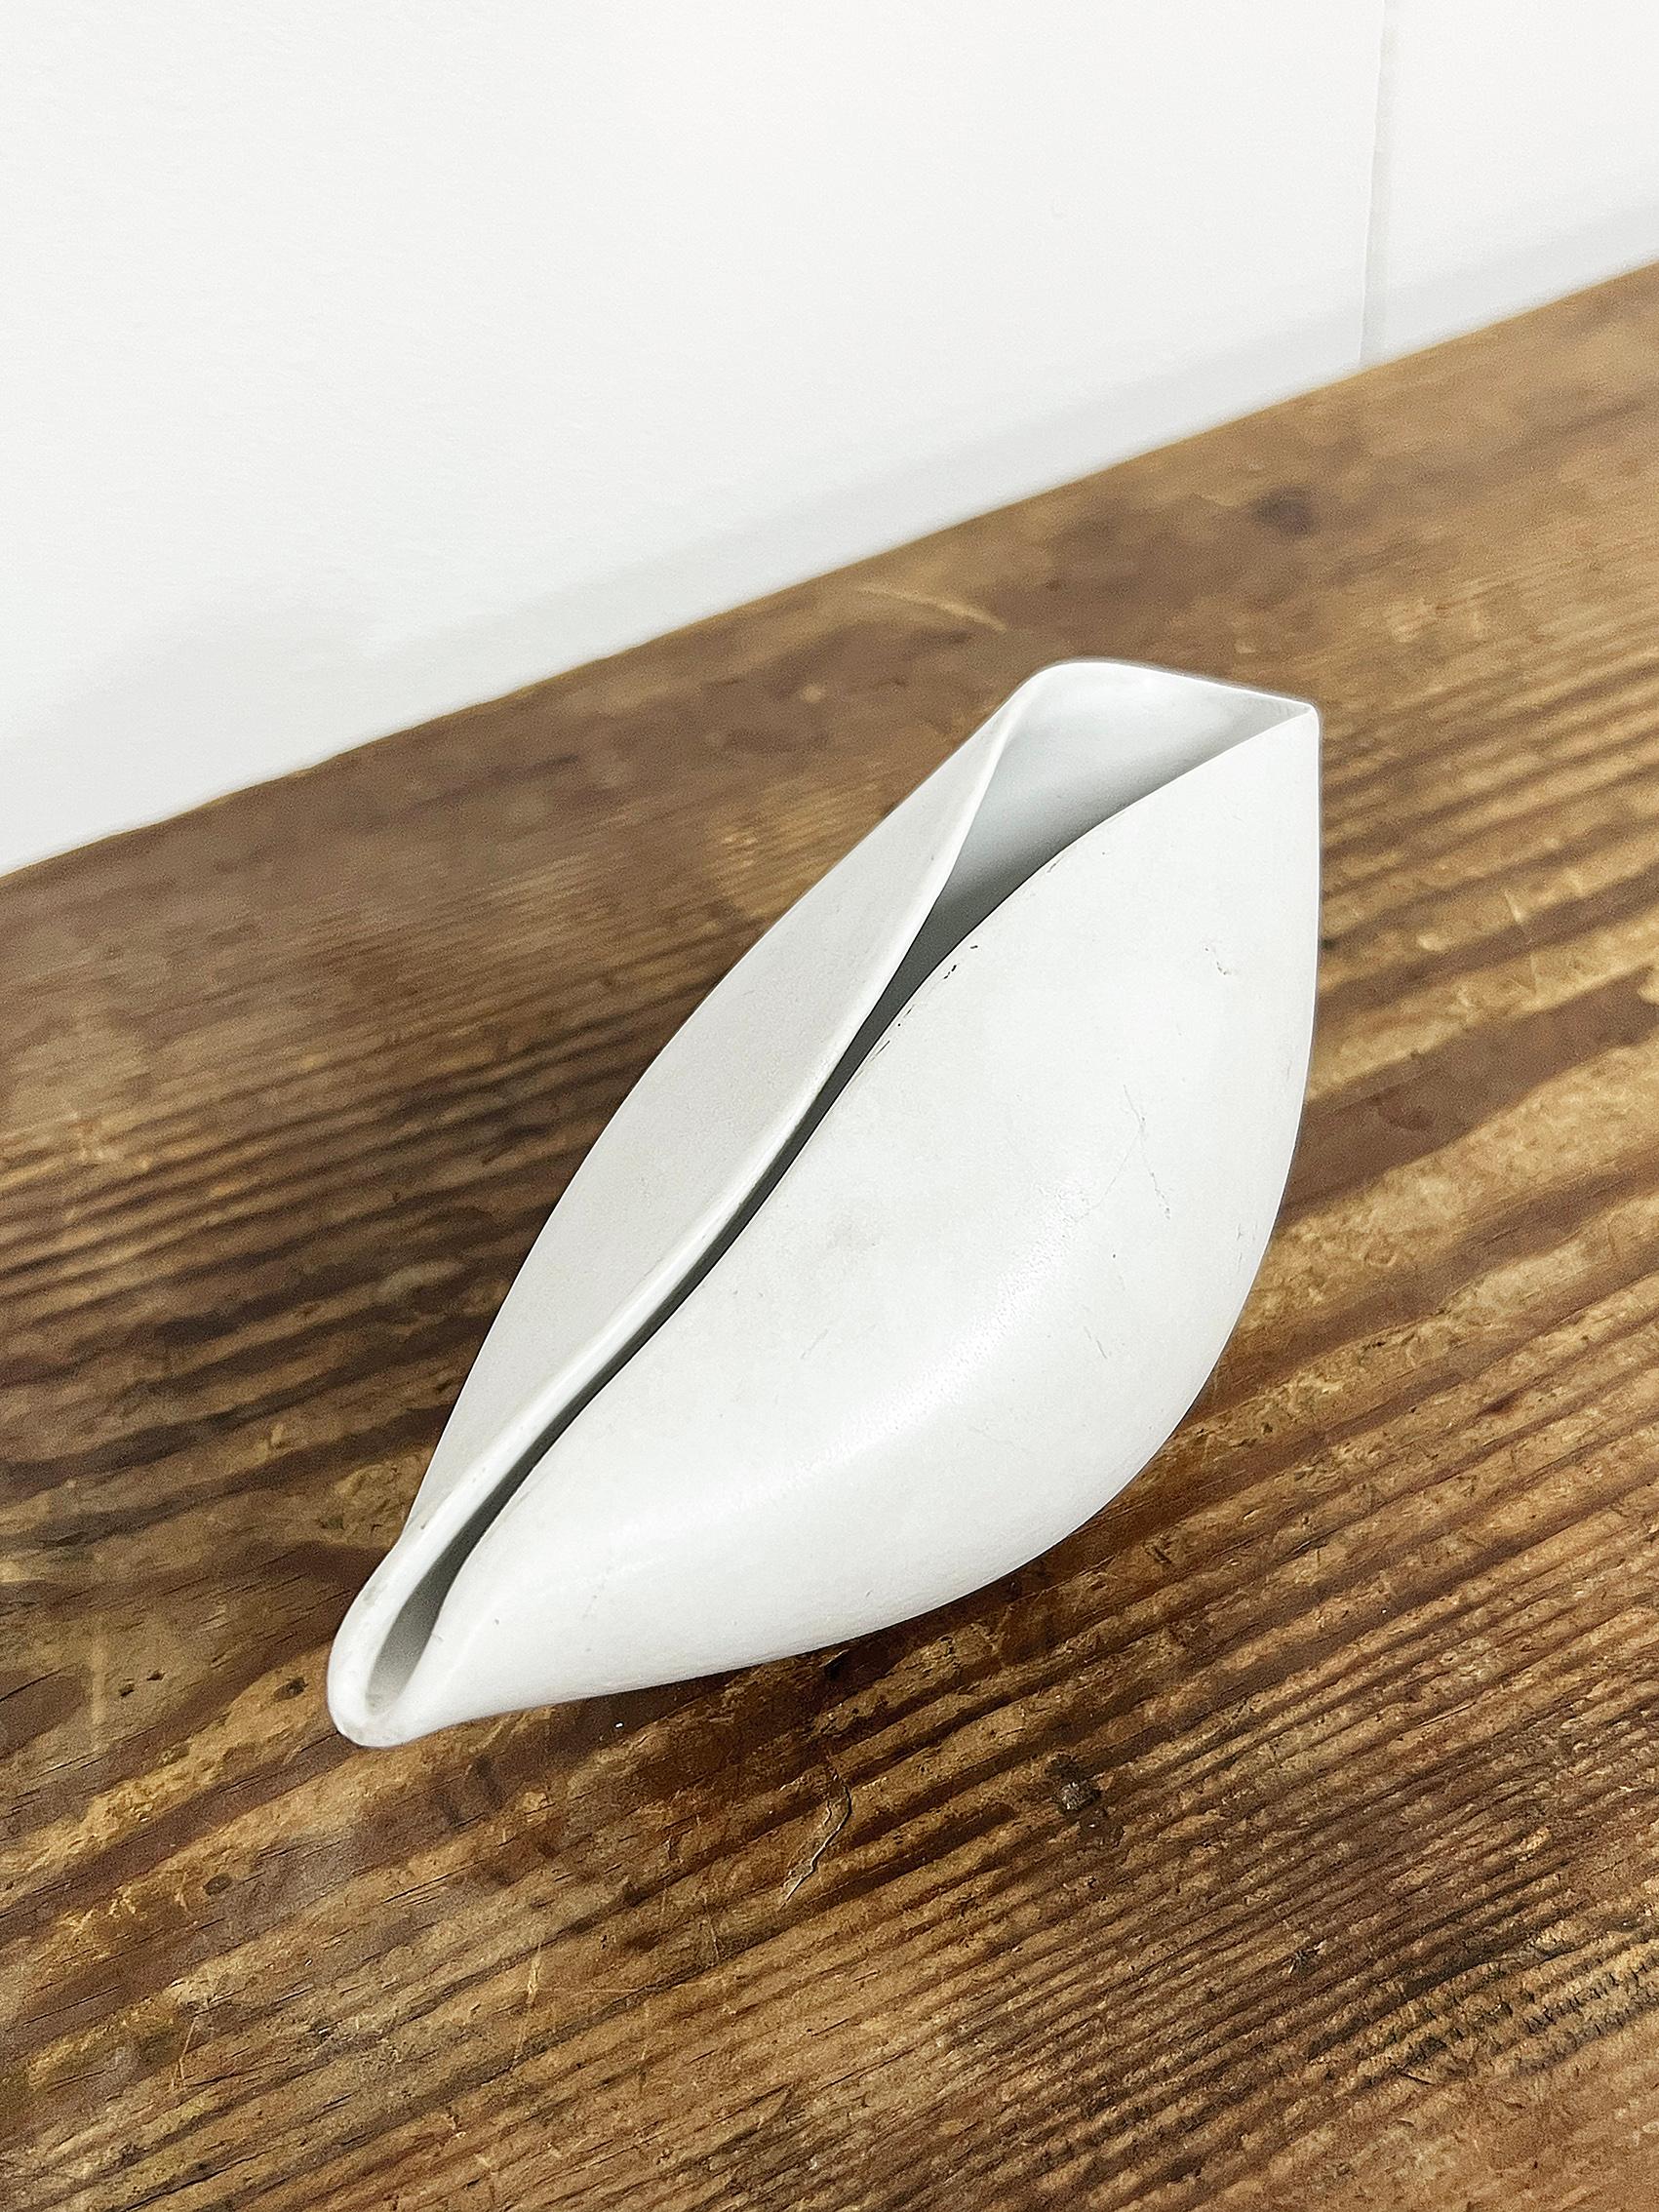 Lovely “Veckla” bowl by Stig Lindberg, white carrara stoneware. Folded form.
Good vintage condition, wear and patina consistent with age and use. 
Blemishes as seen on the pictures. 